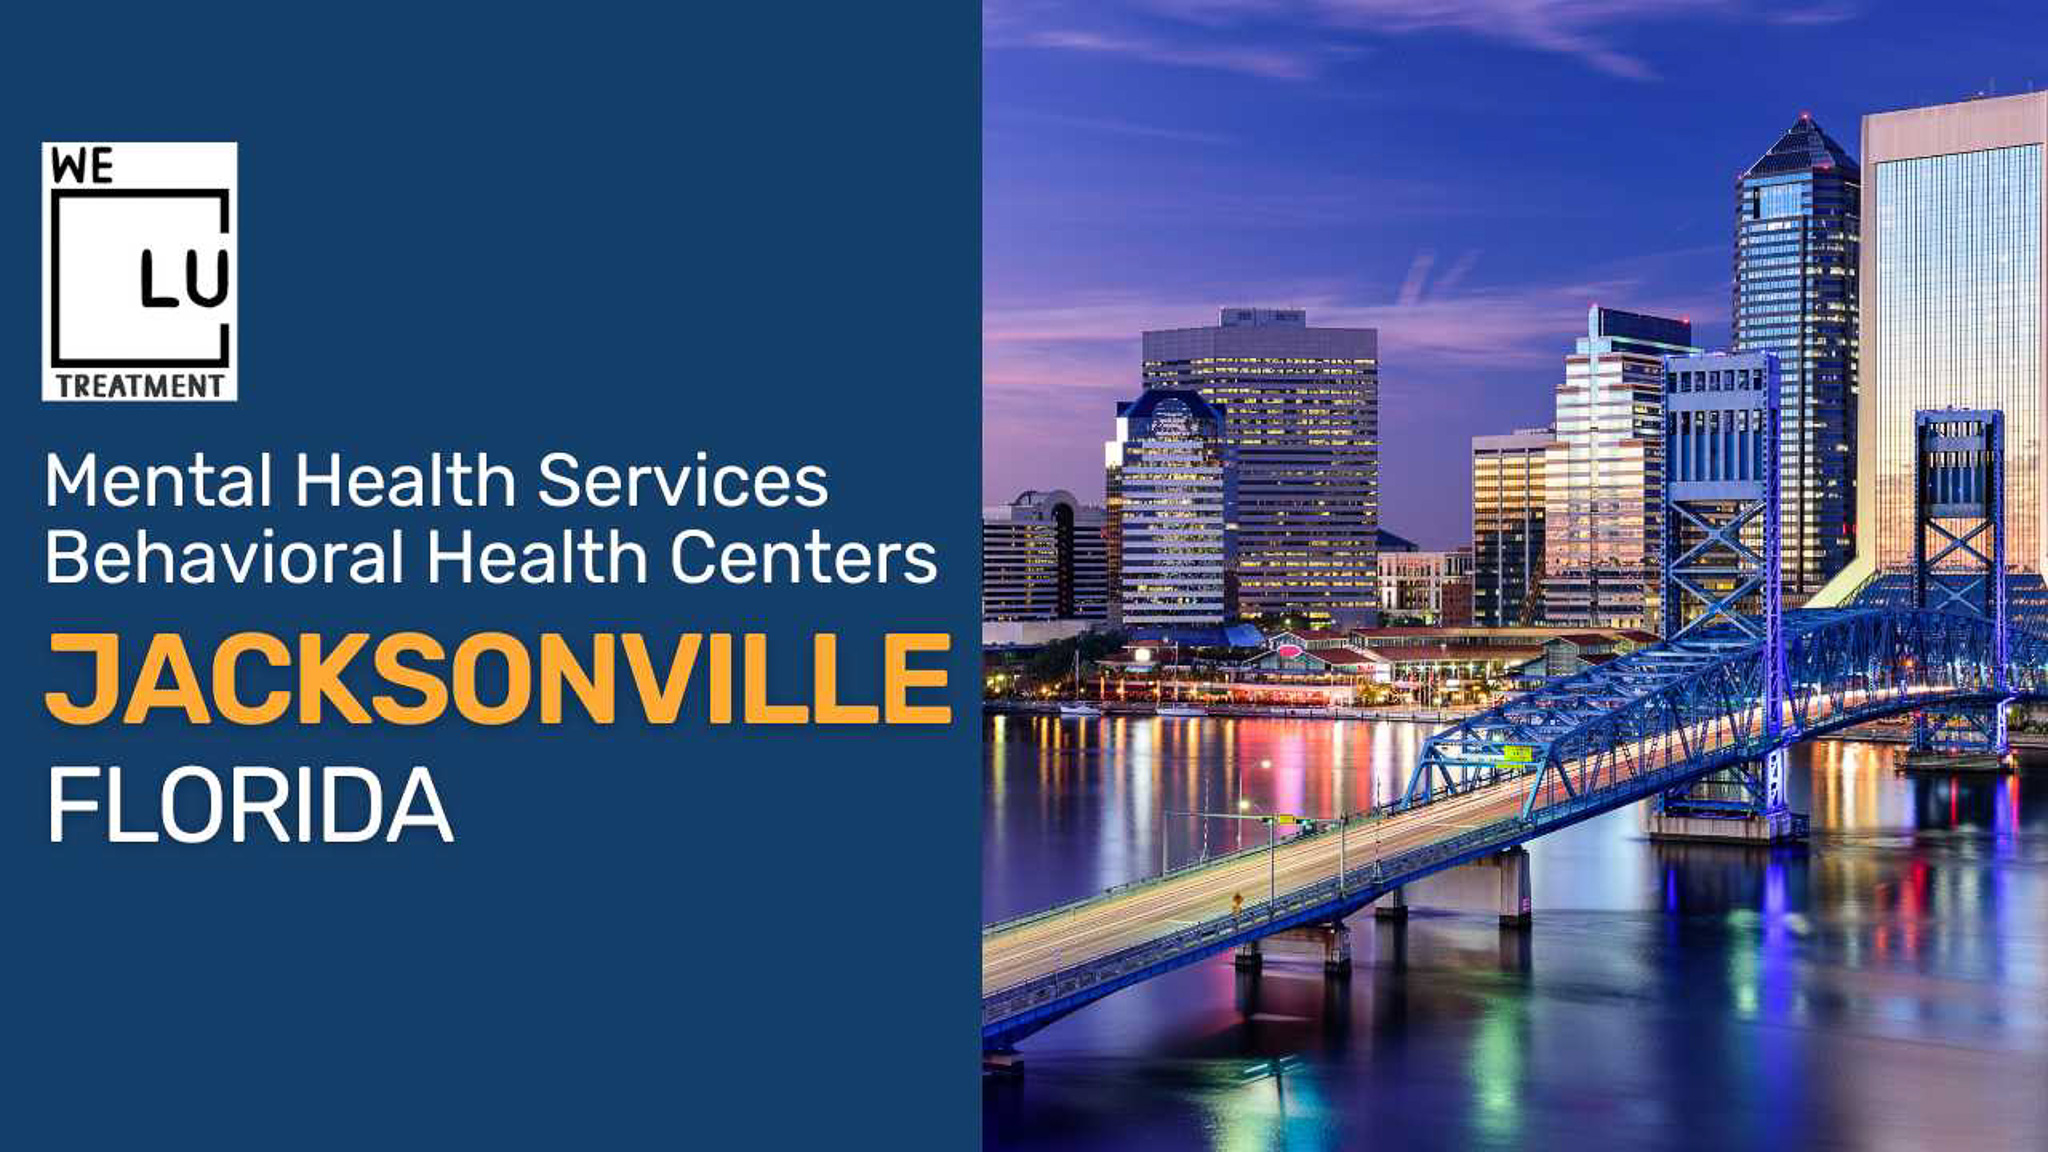 Jacksonville FL (MH) We Level Up treatment center for drug and alcohol rehab detox and mental health services - Image 1